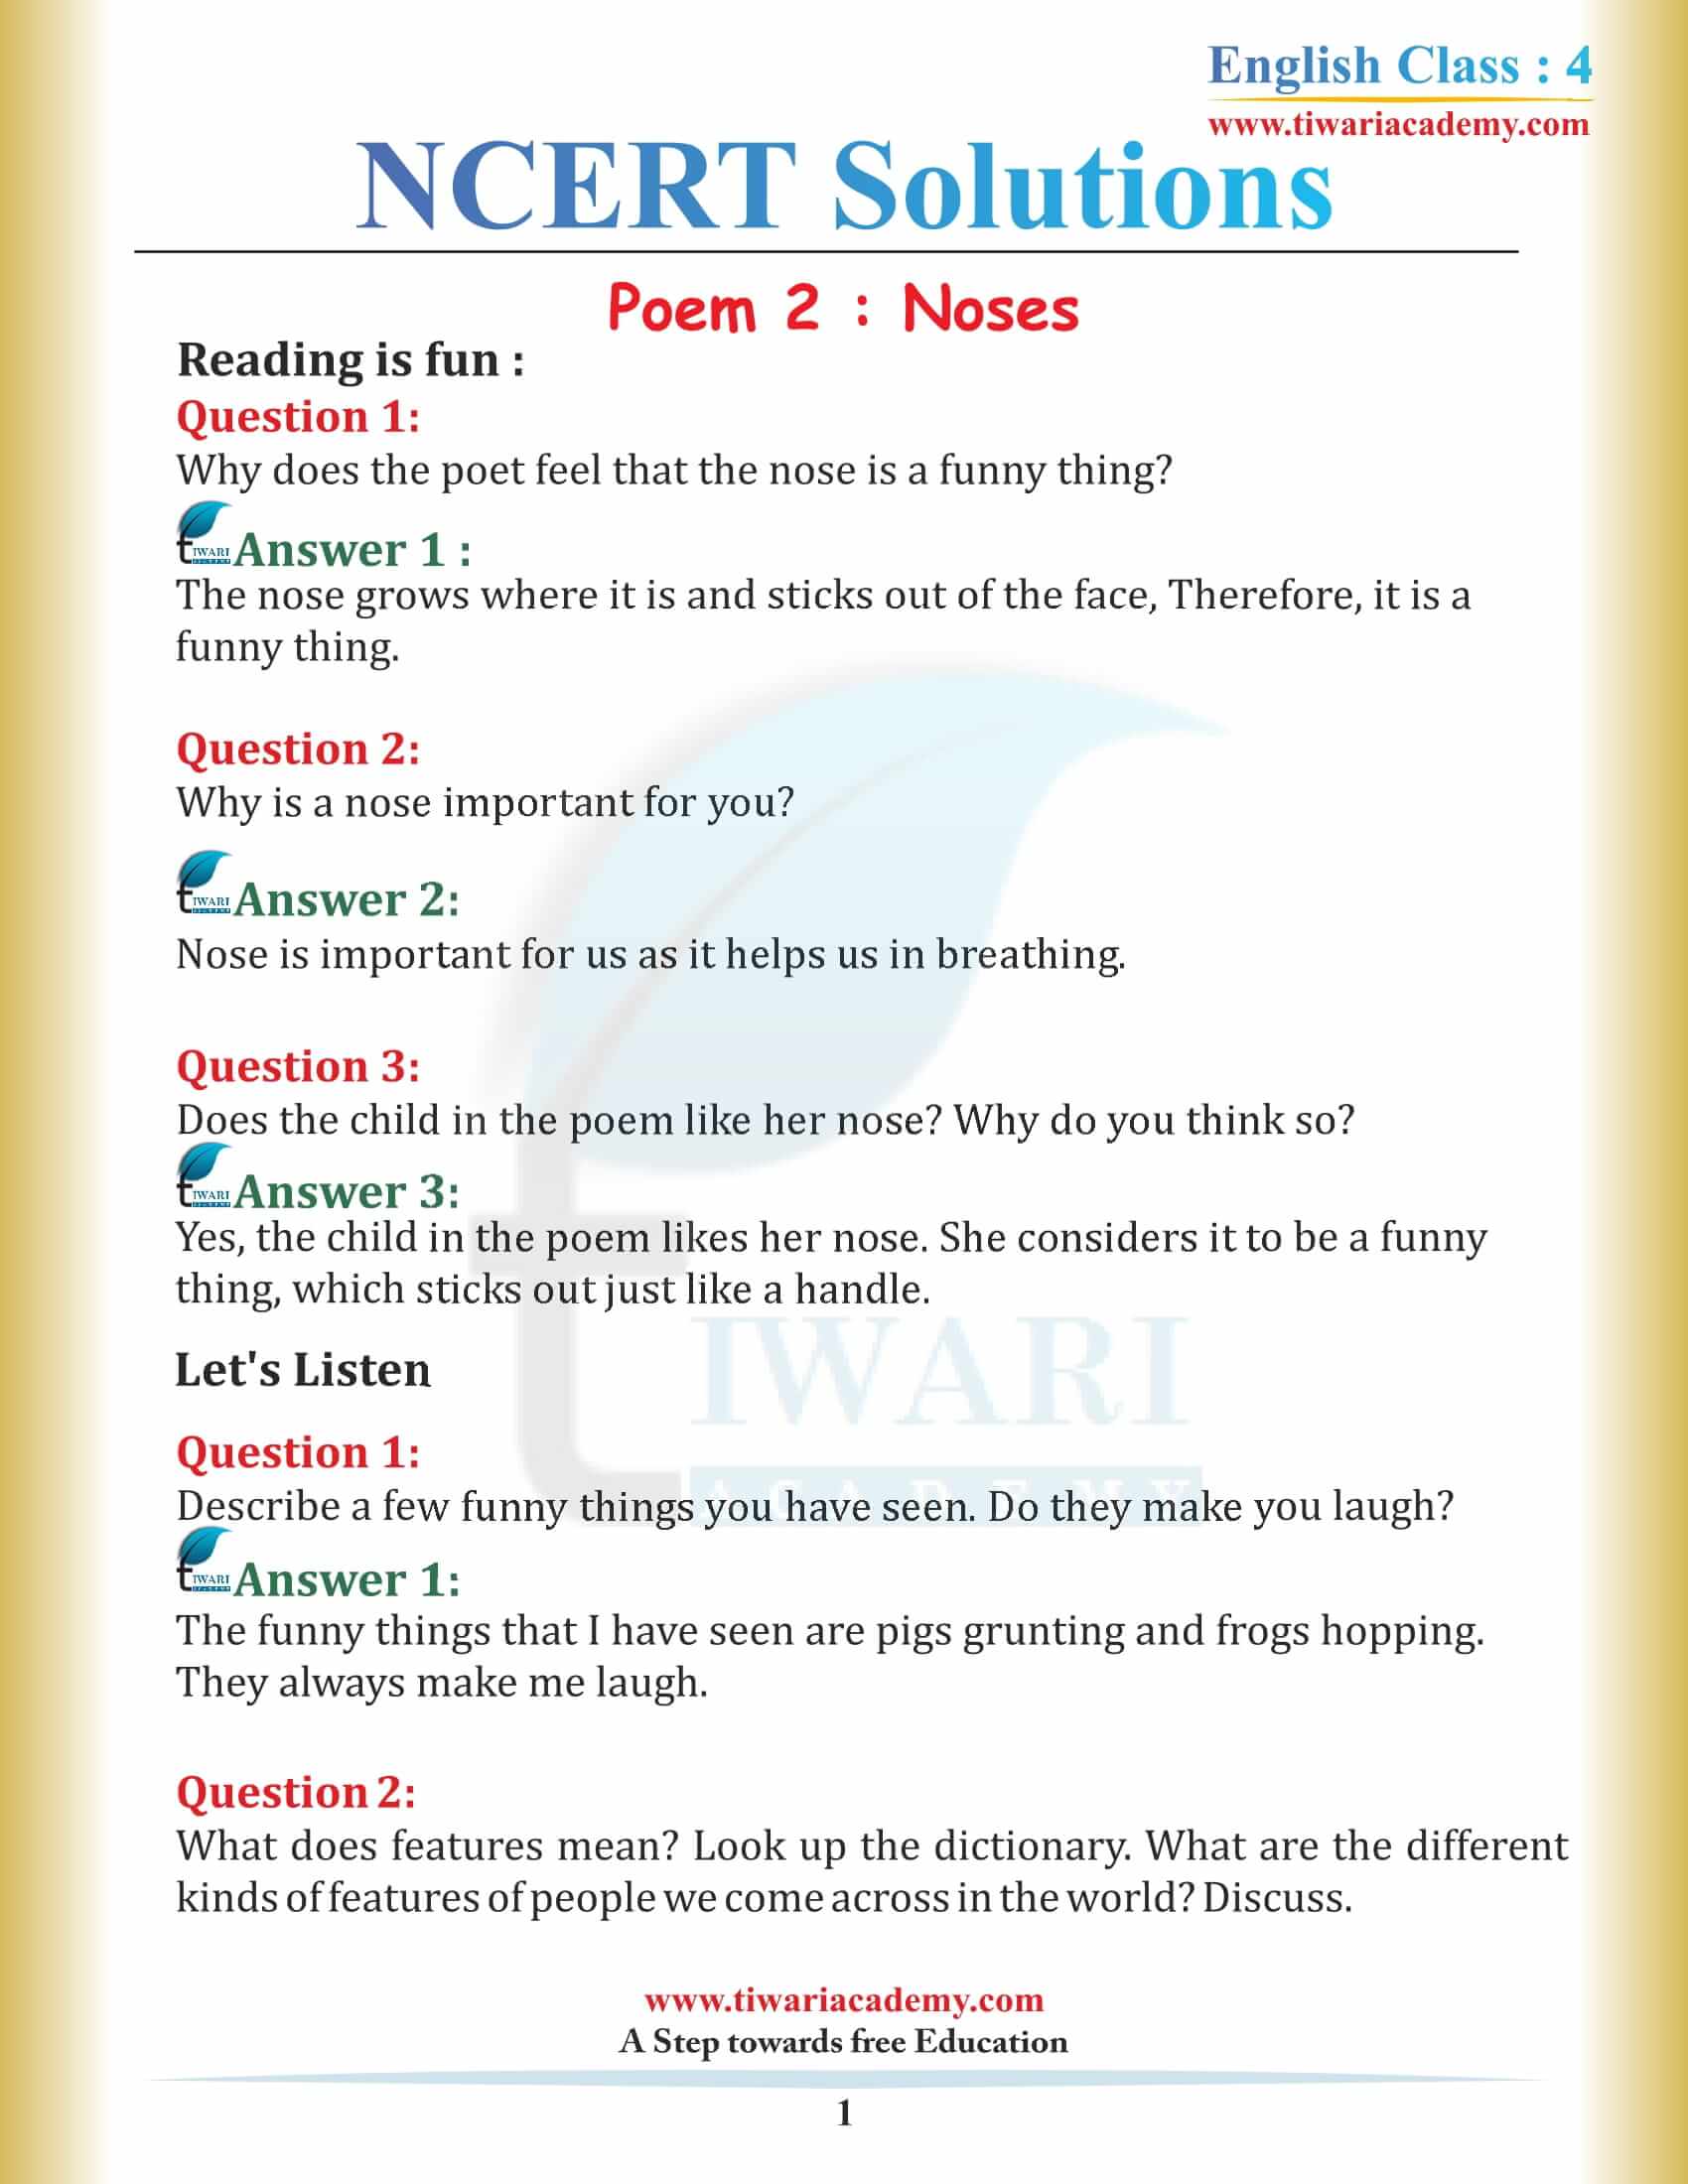 NCERT Solutions for Class 4 English Unit 2 Chapter 1 Noses